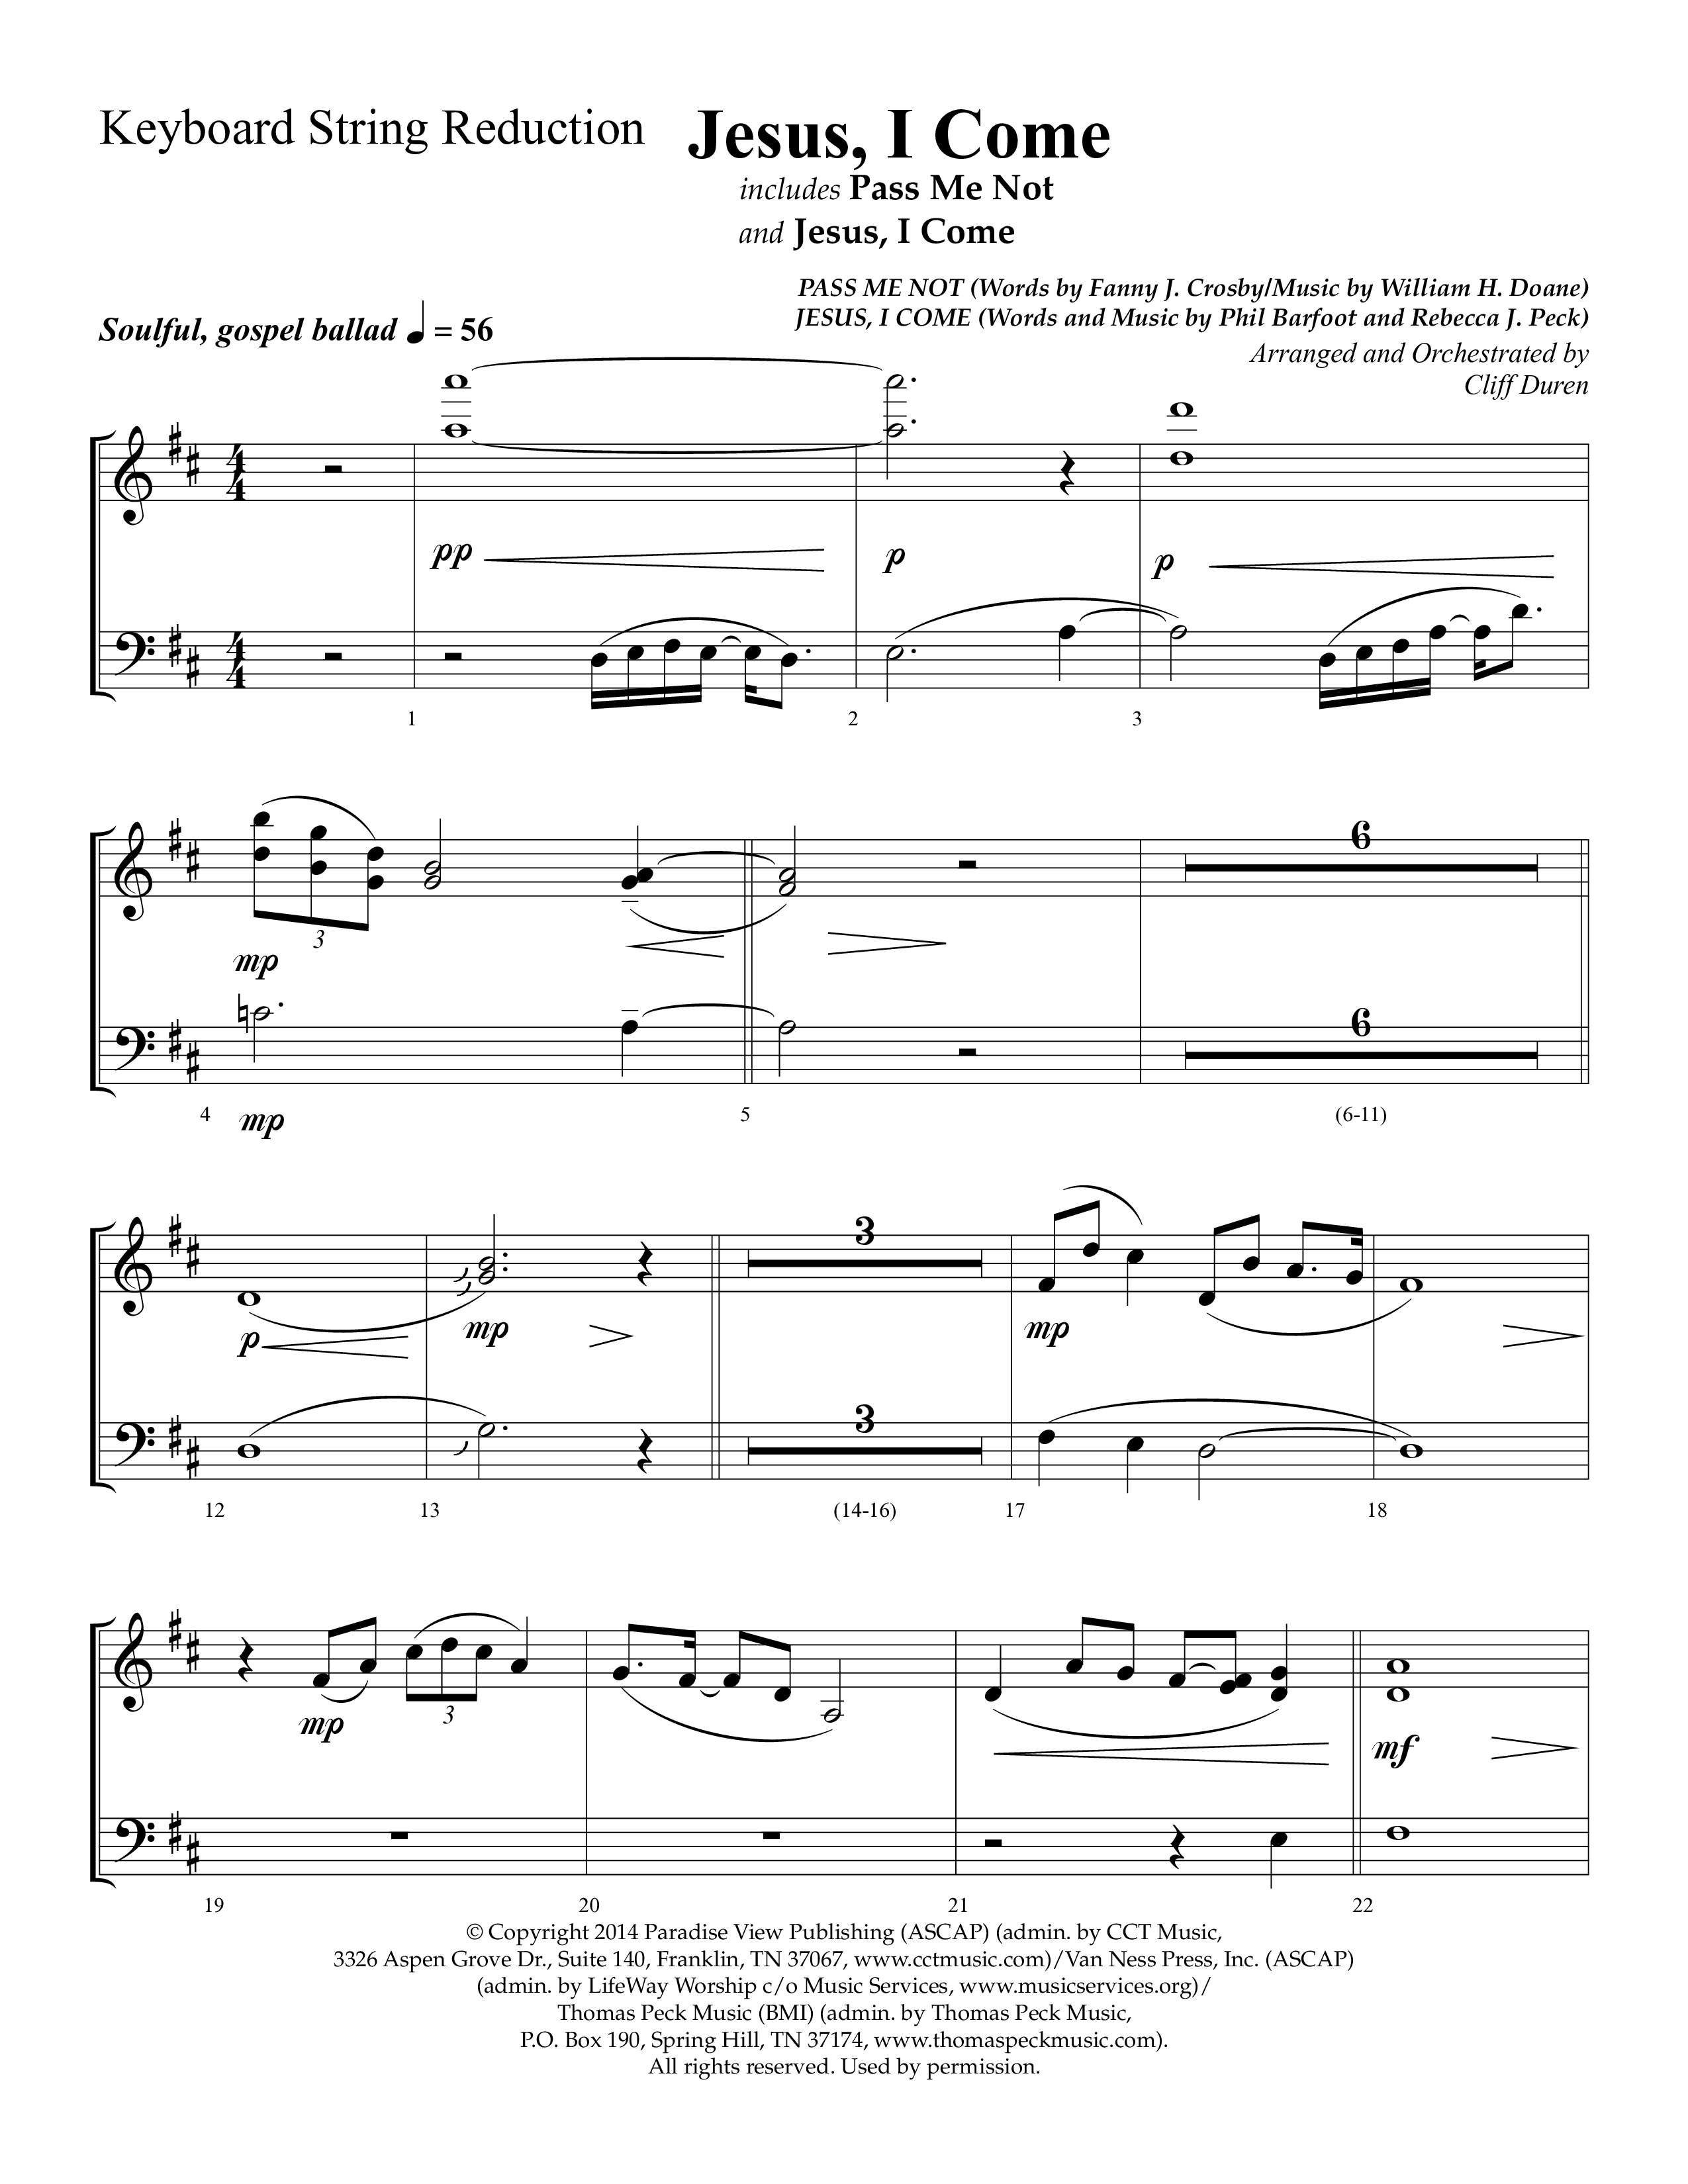 Jesus I Come (with Pass Me Not) (Choral Anthem SATB) String Reduction (Lifeway Choral / Arr. Cliff Duren)